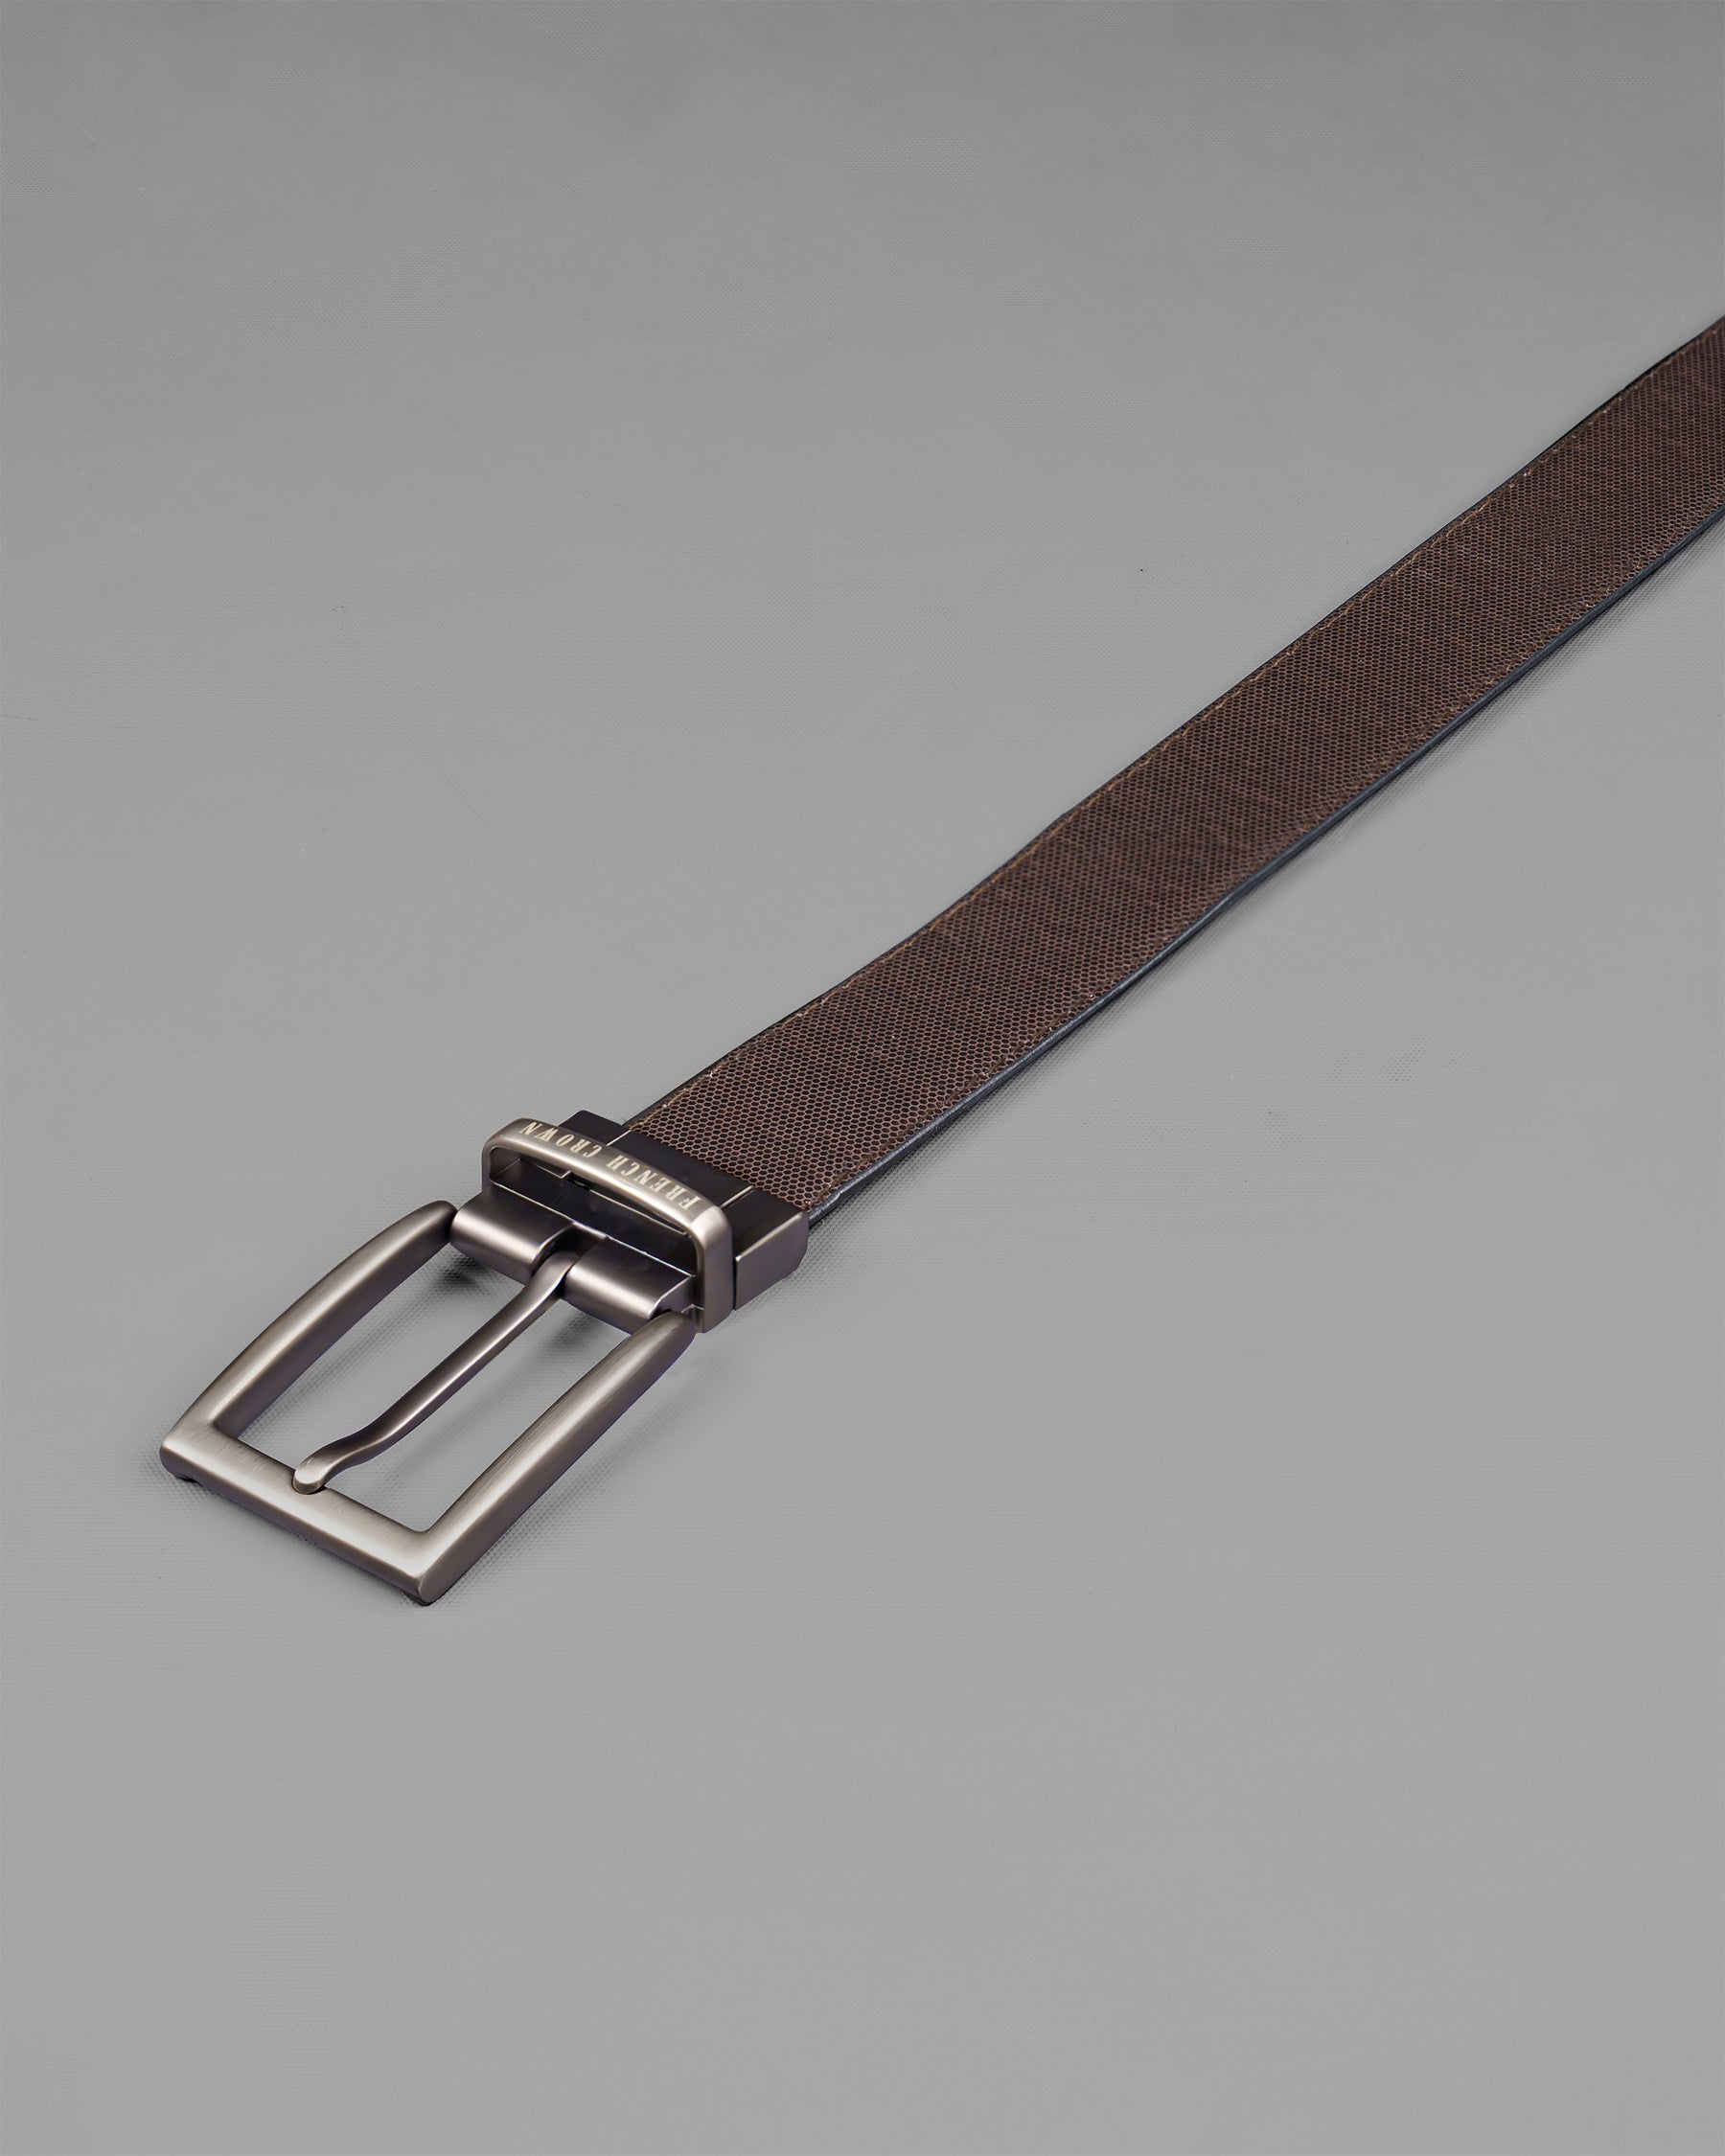 Silver Buckle with Jade Black and Brown Leather Free Handcrafted Reversible Belt BT053-28, BT053-30, BT053-32, BT053-34, BT053-36, BT053-38